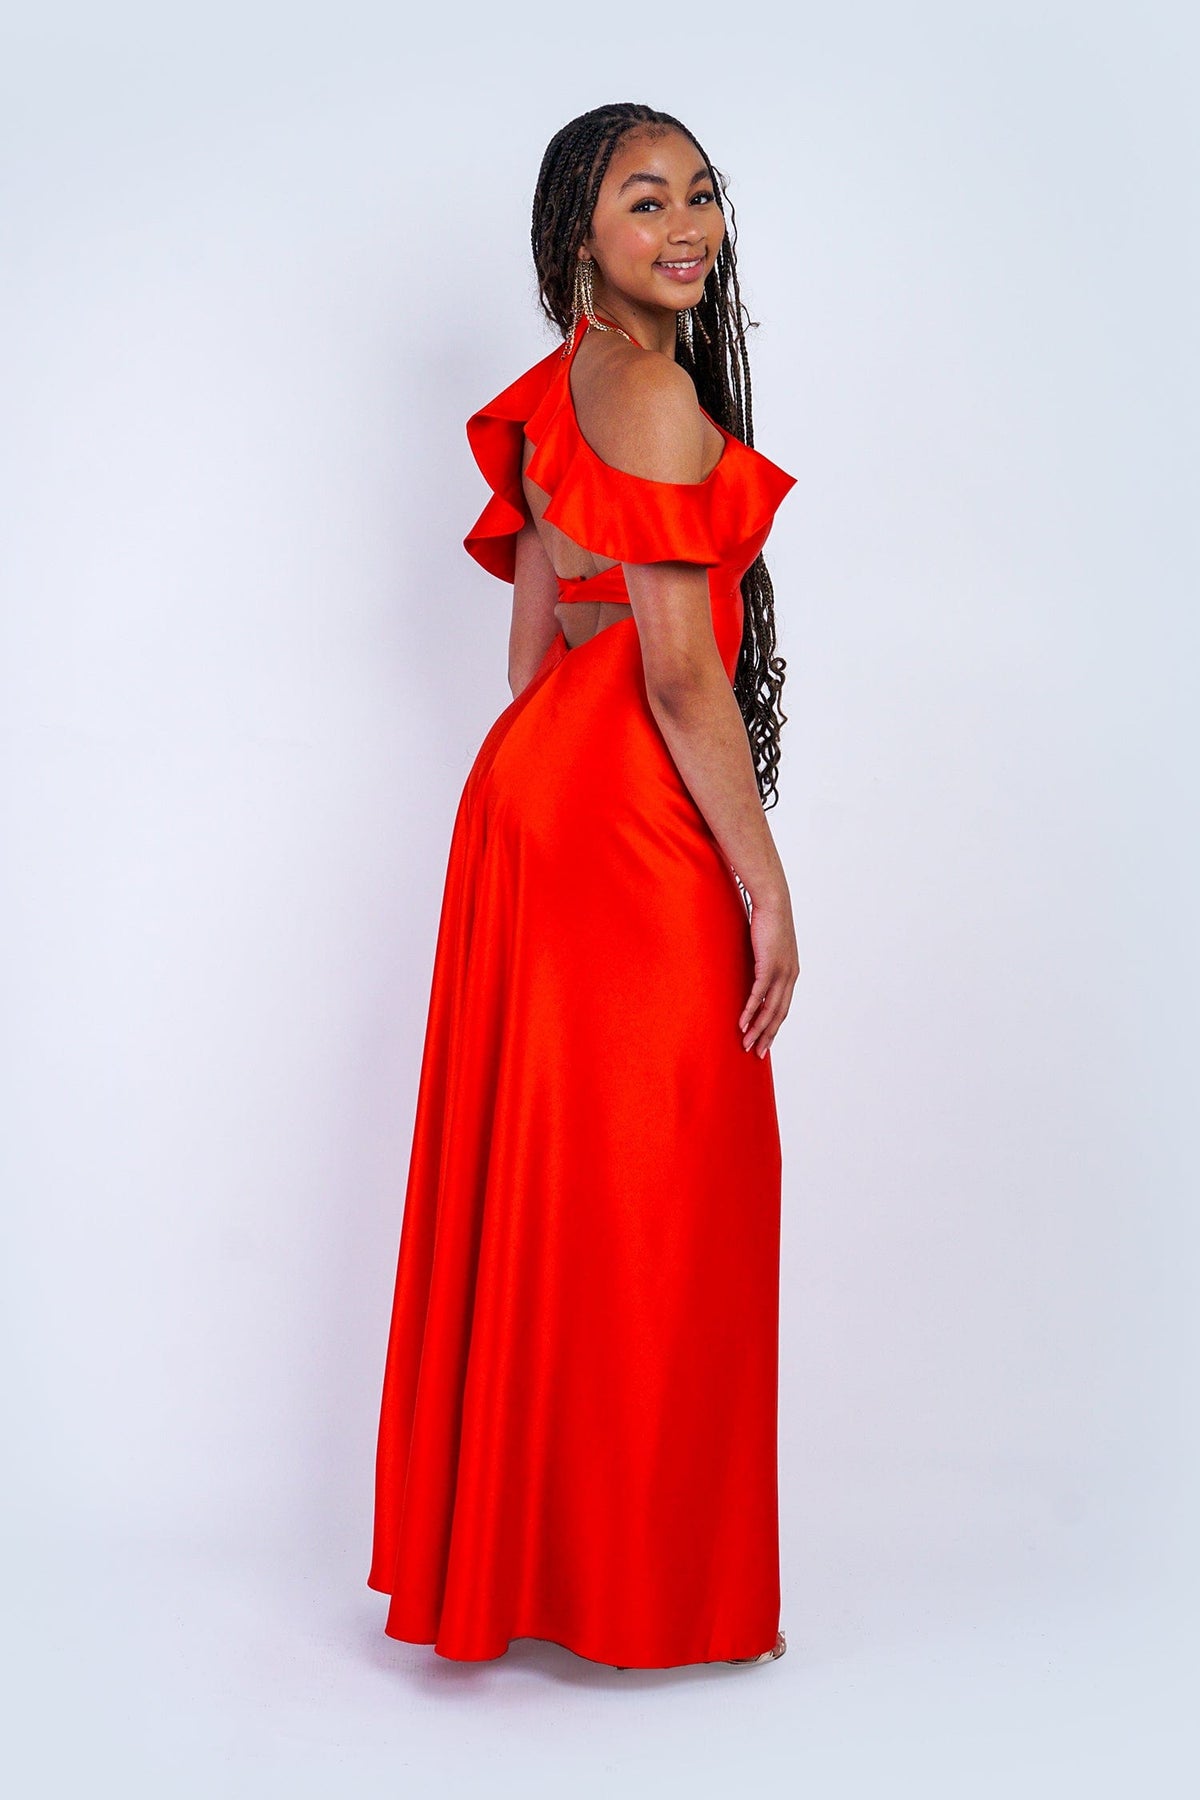 Chloe Dao GOWNS Red Orange Off Shoulder Ruffle Kai Gown